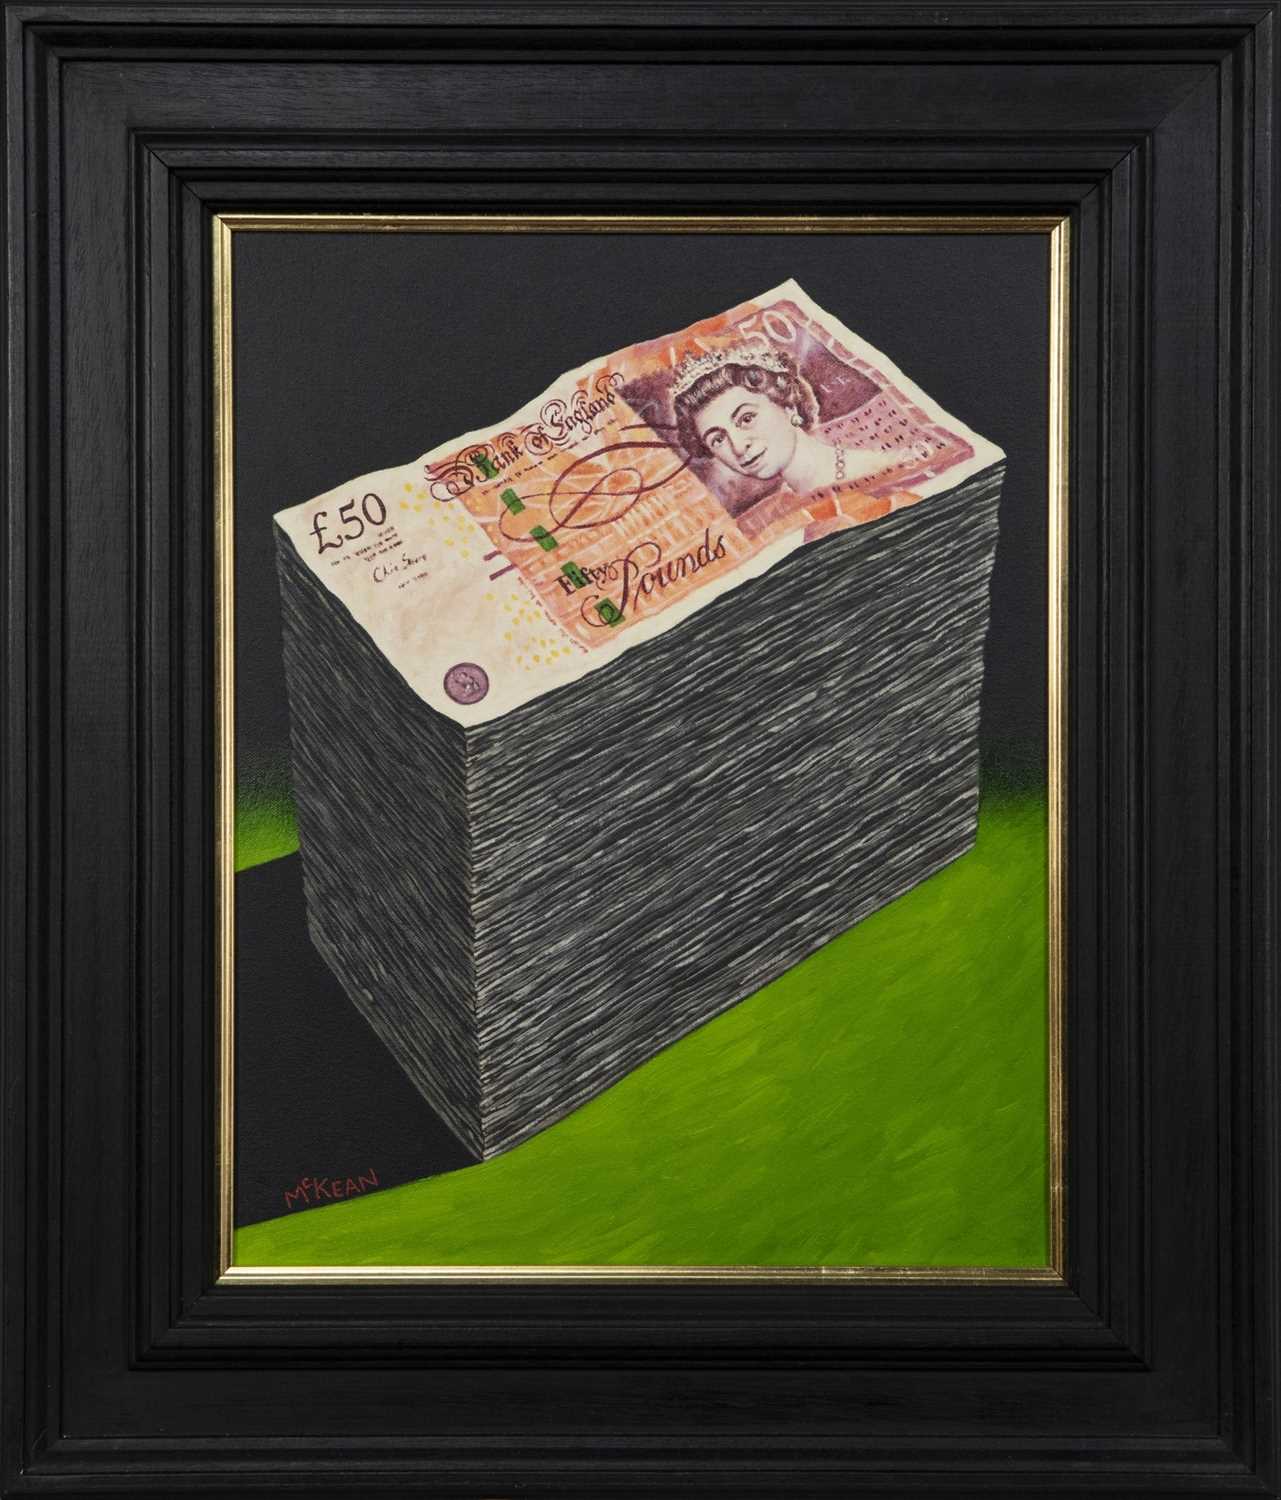 Lot 194 - EYE CANDY FOR BANKERS, AN OIL BY GRAHAM MCKEAN